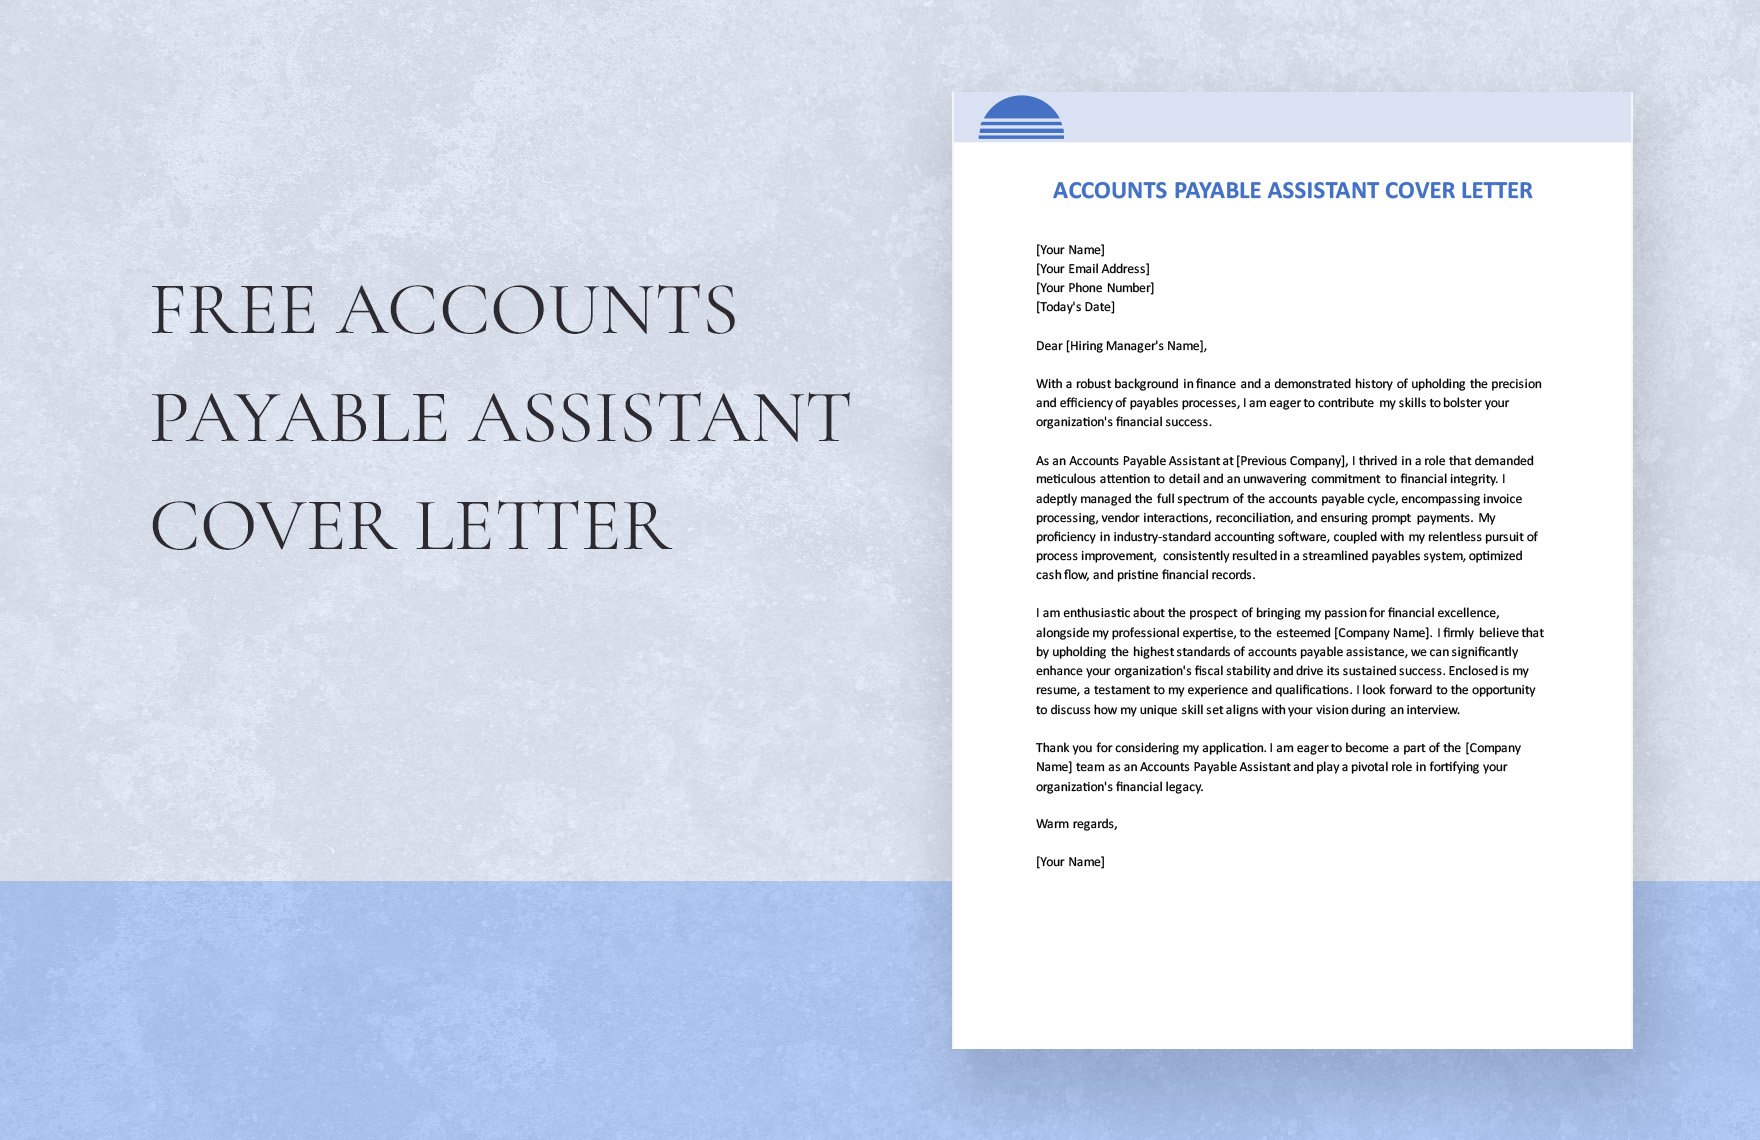 Accounts Payable Assistant Cover Letter